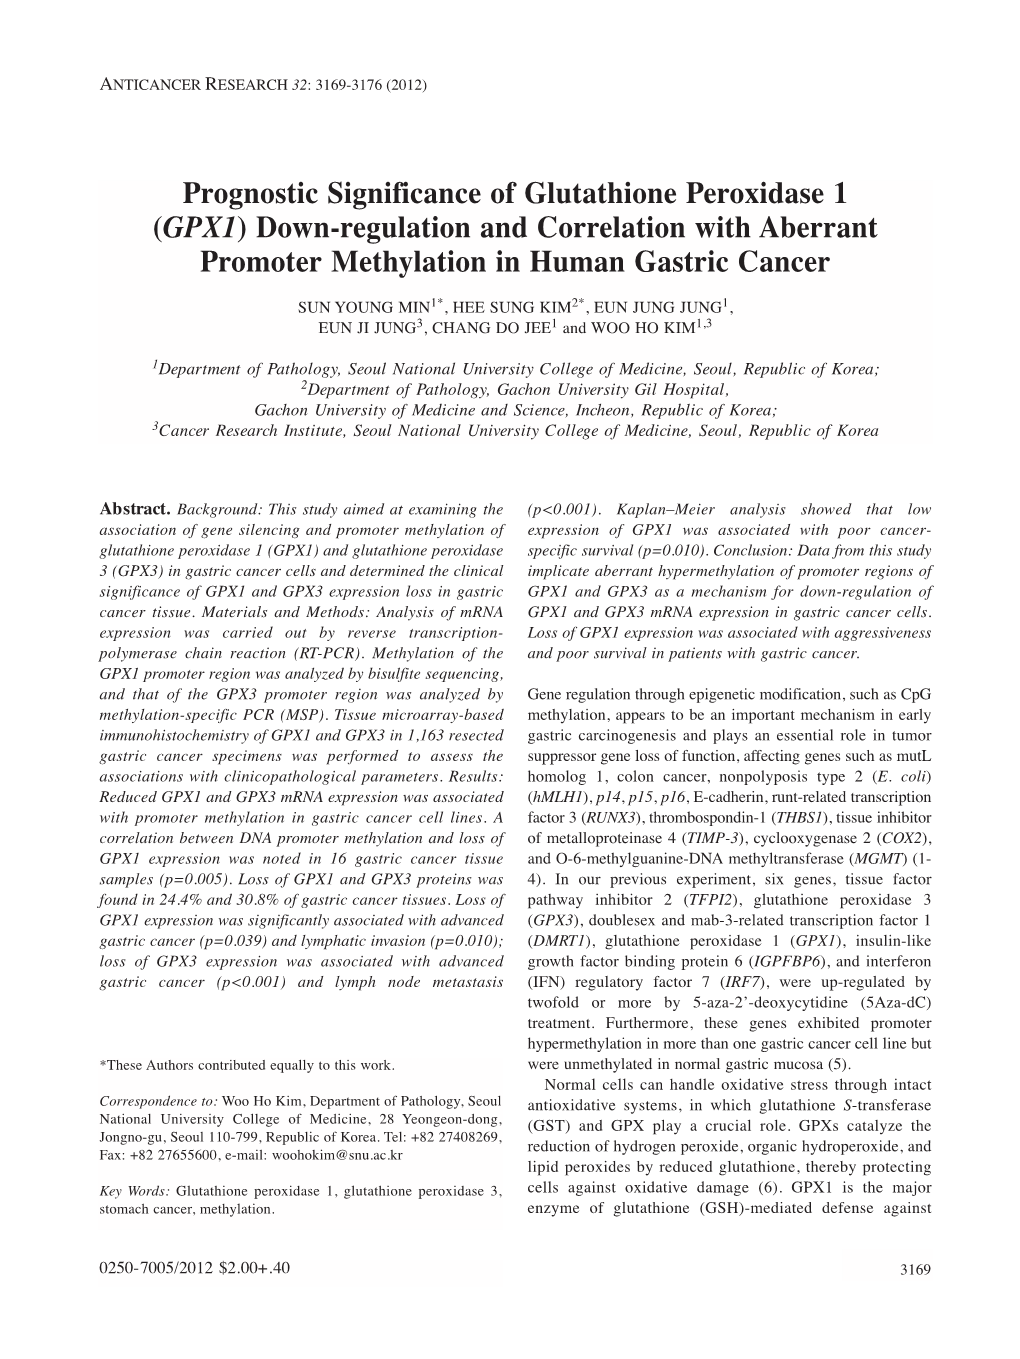 Prognostic Significance of Glutathione Peroxidase 1 (GPX1) Down-Regulation and Correlation with Aberrant Promoter Methylation in Human Gastric Cancer